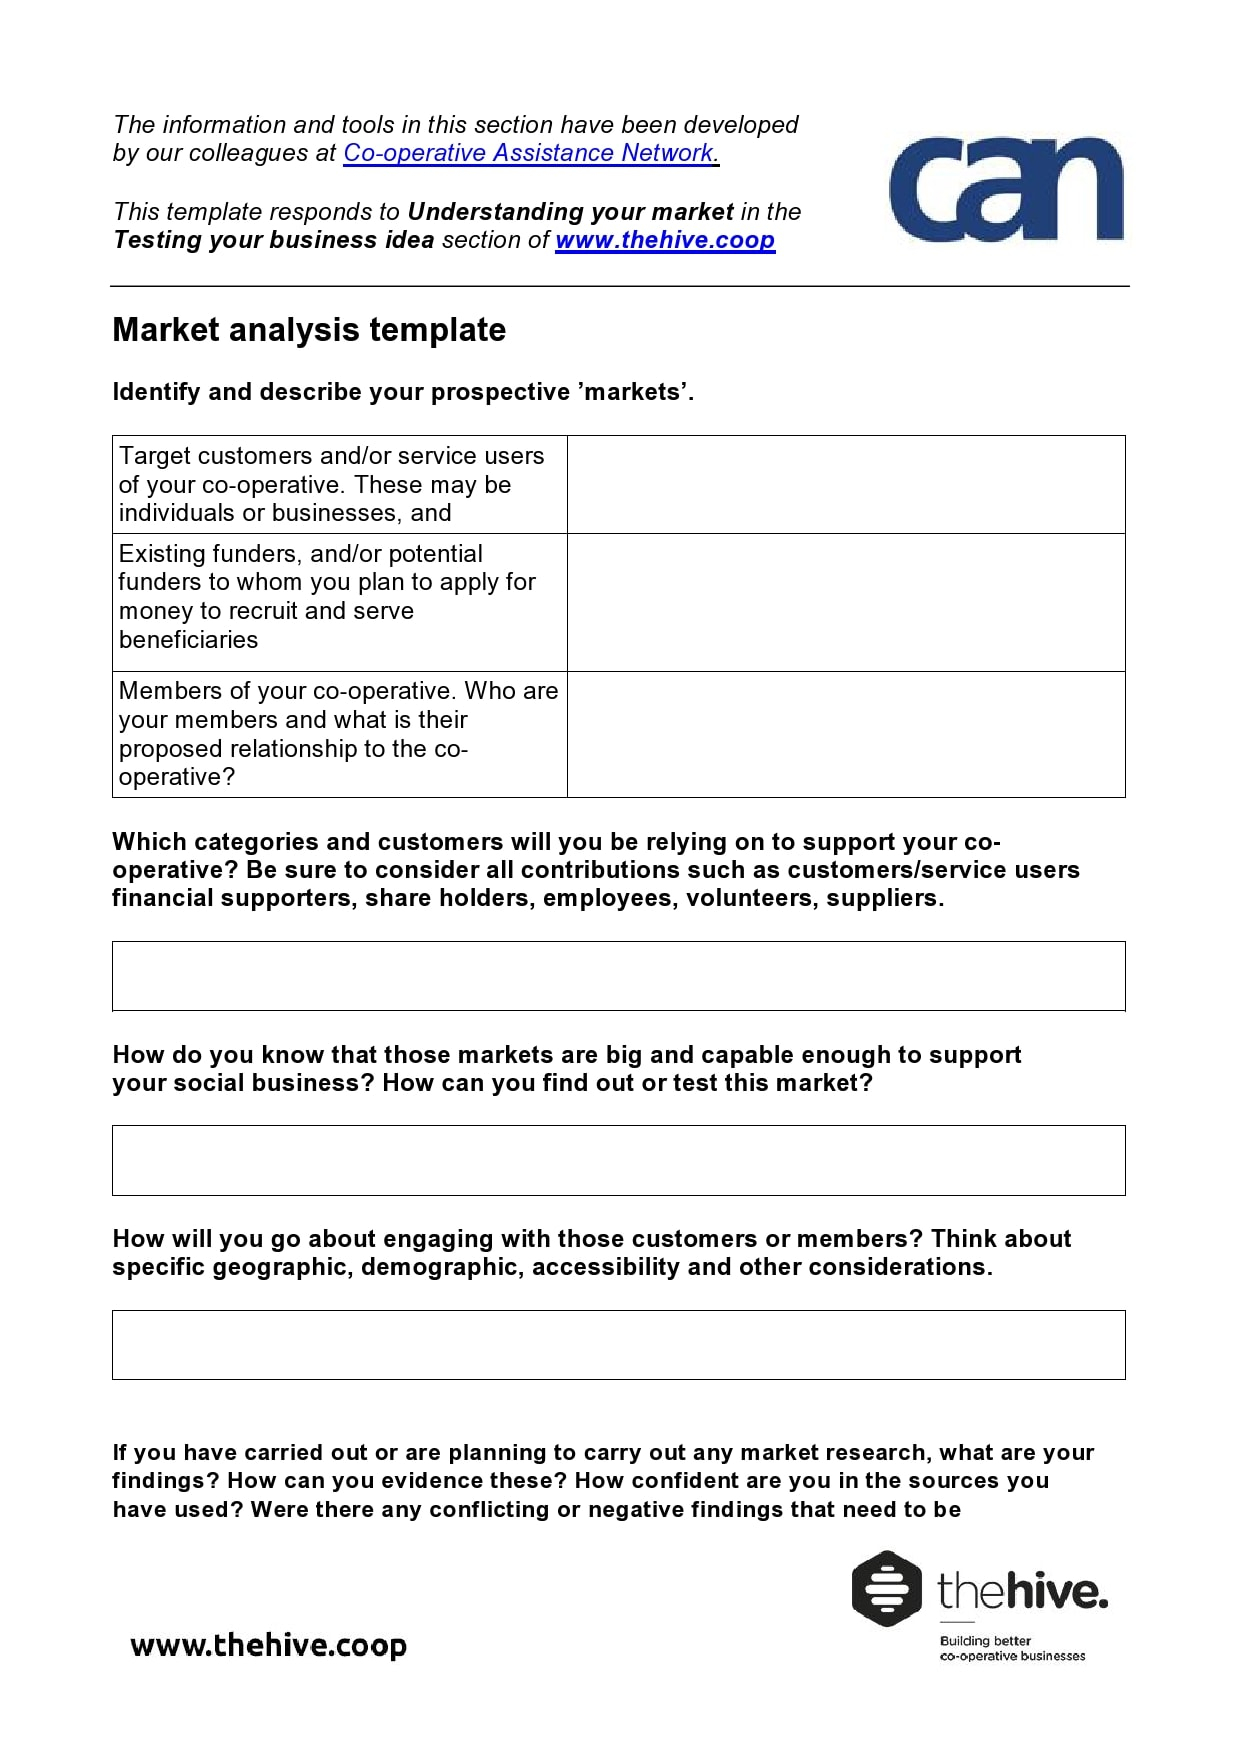 10 Best Market Analysis Templates (Free Download) - TemplateArchive